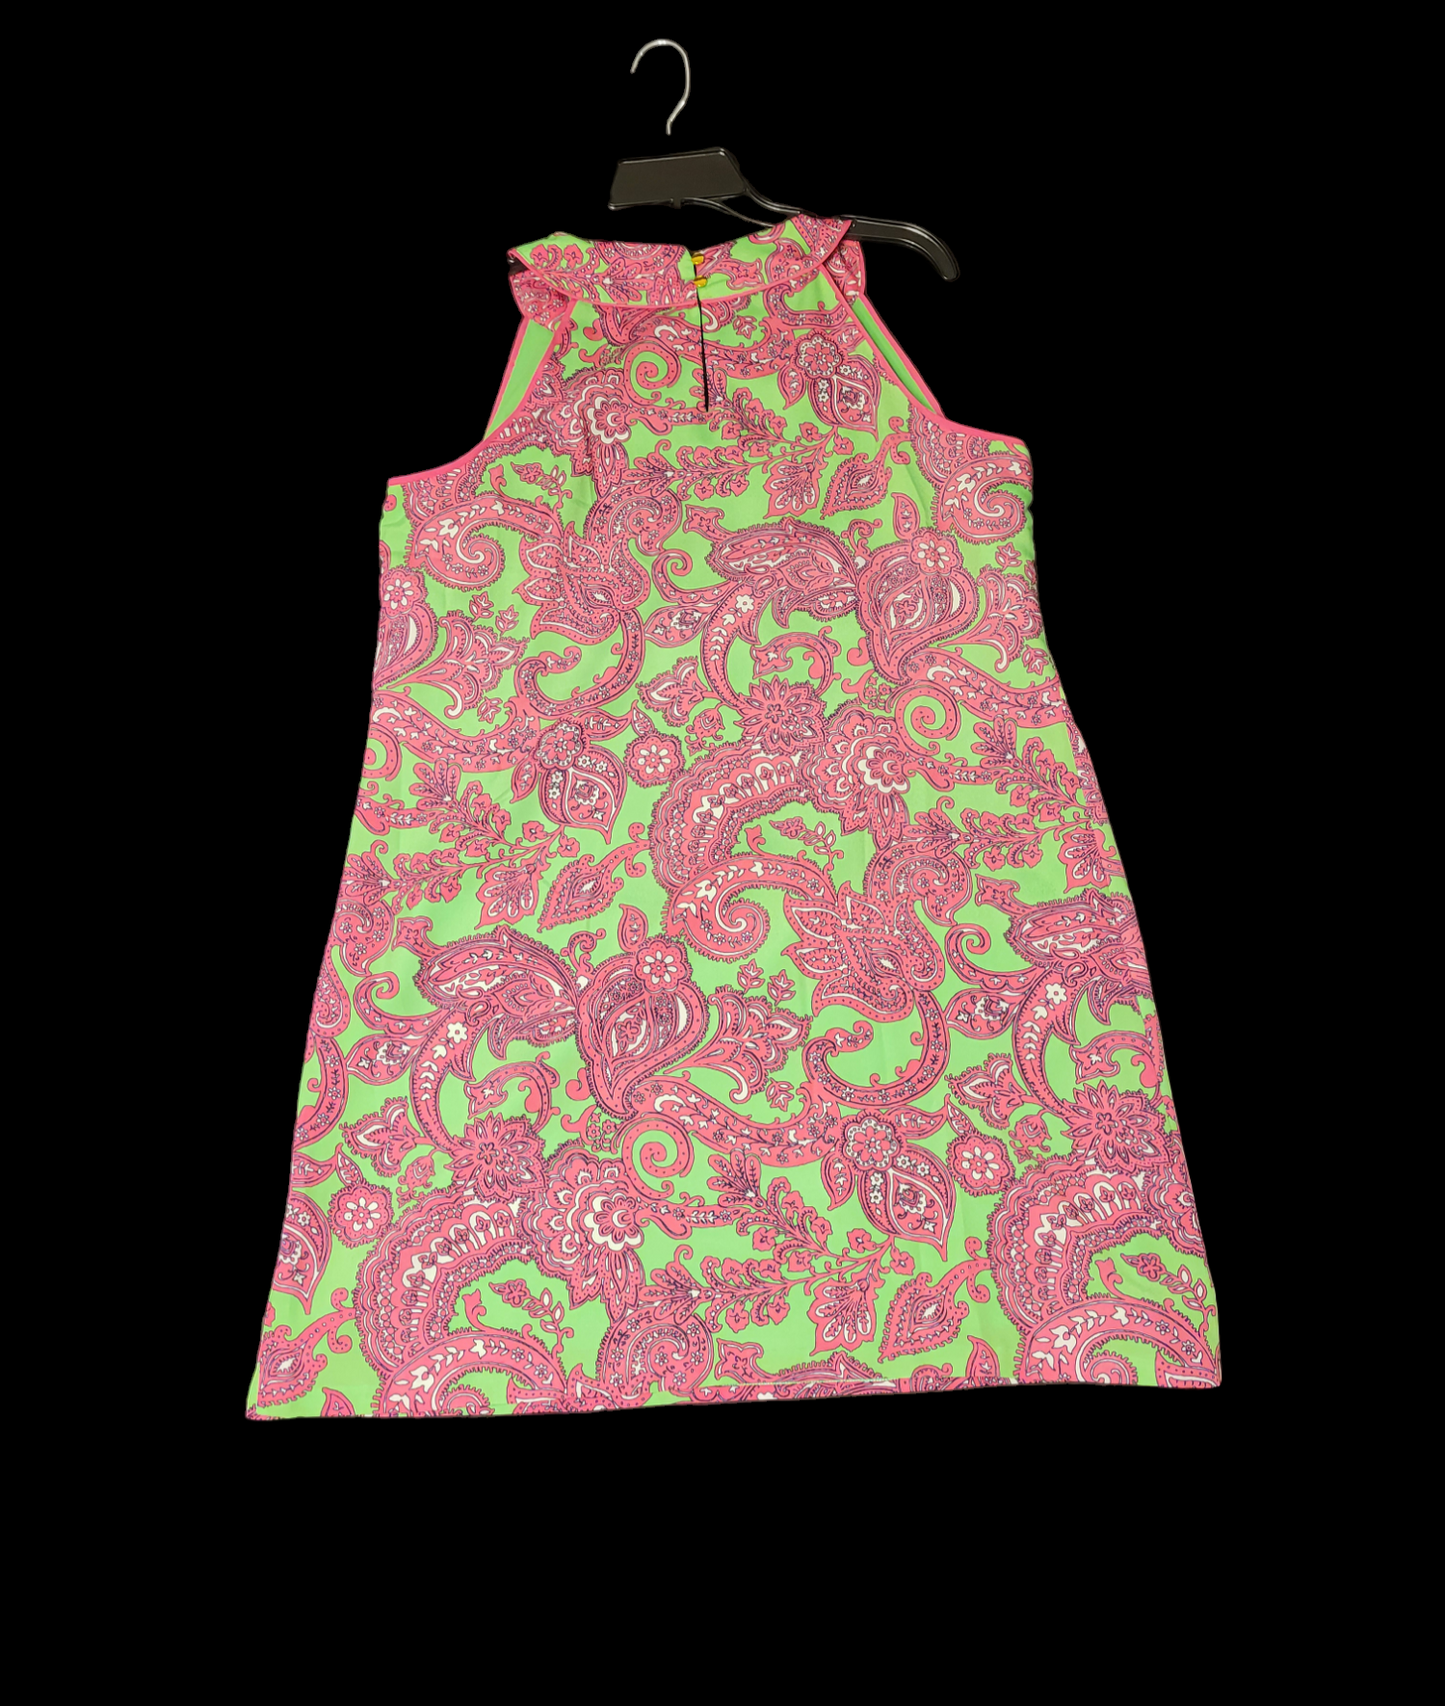 Crown and Ivy Hot Pink and Lime Green Dress